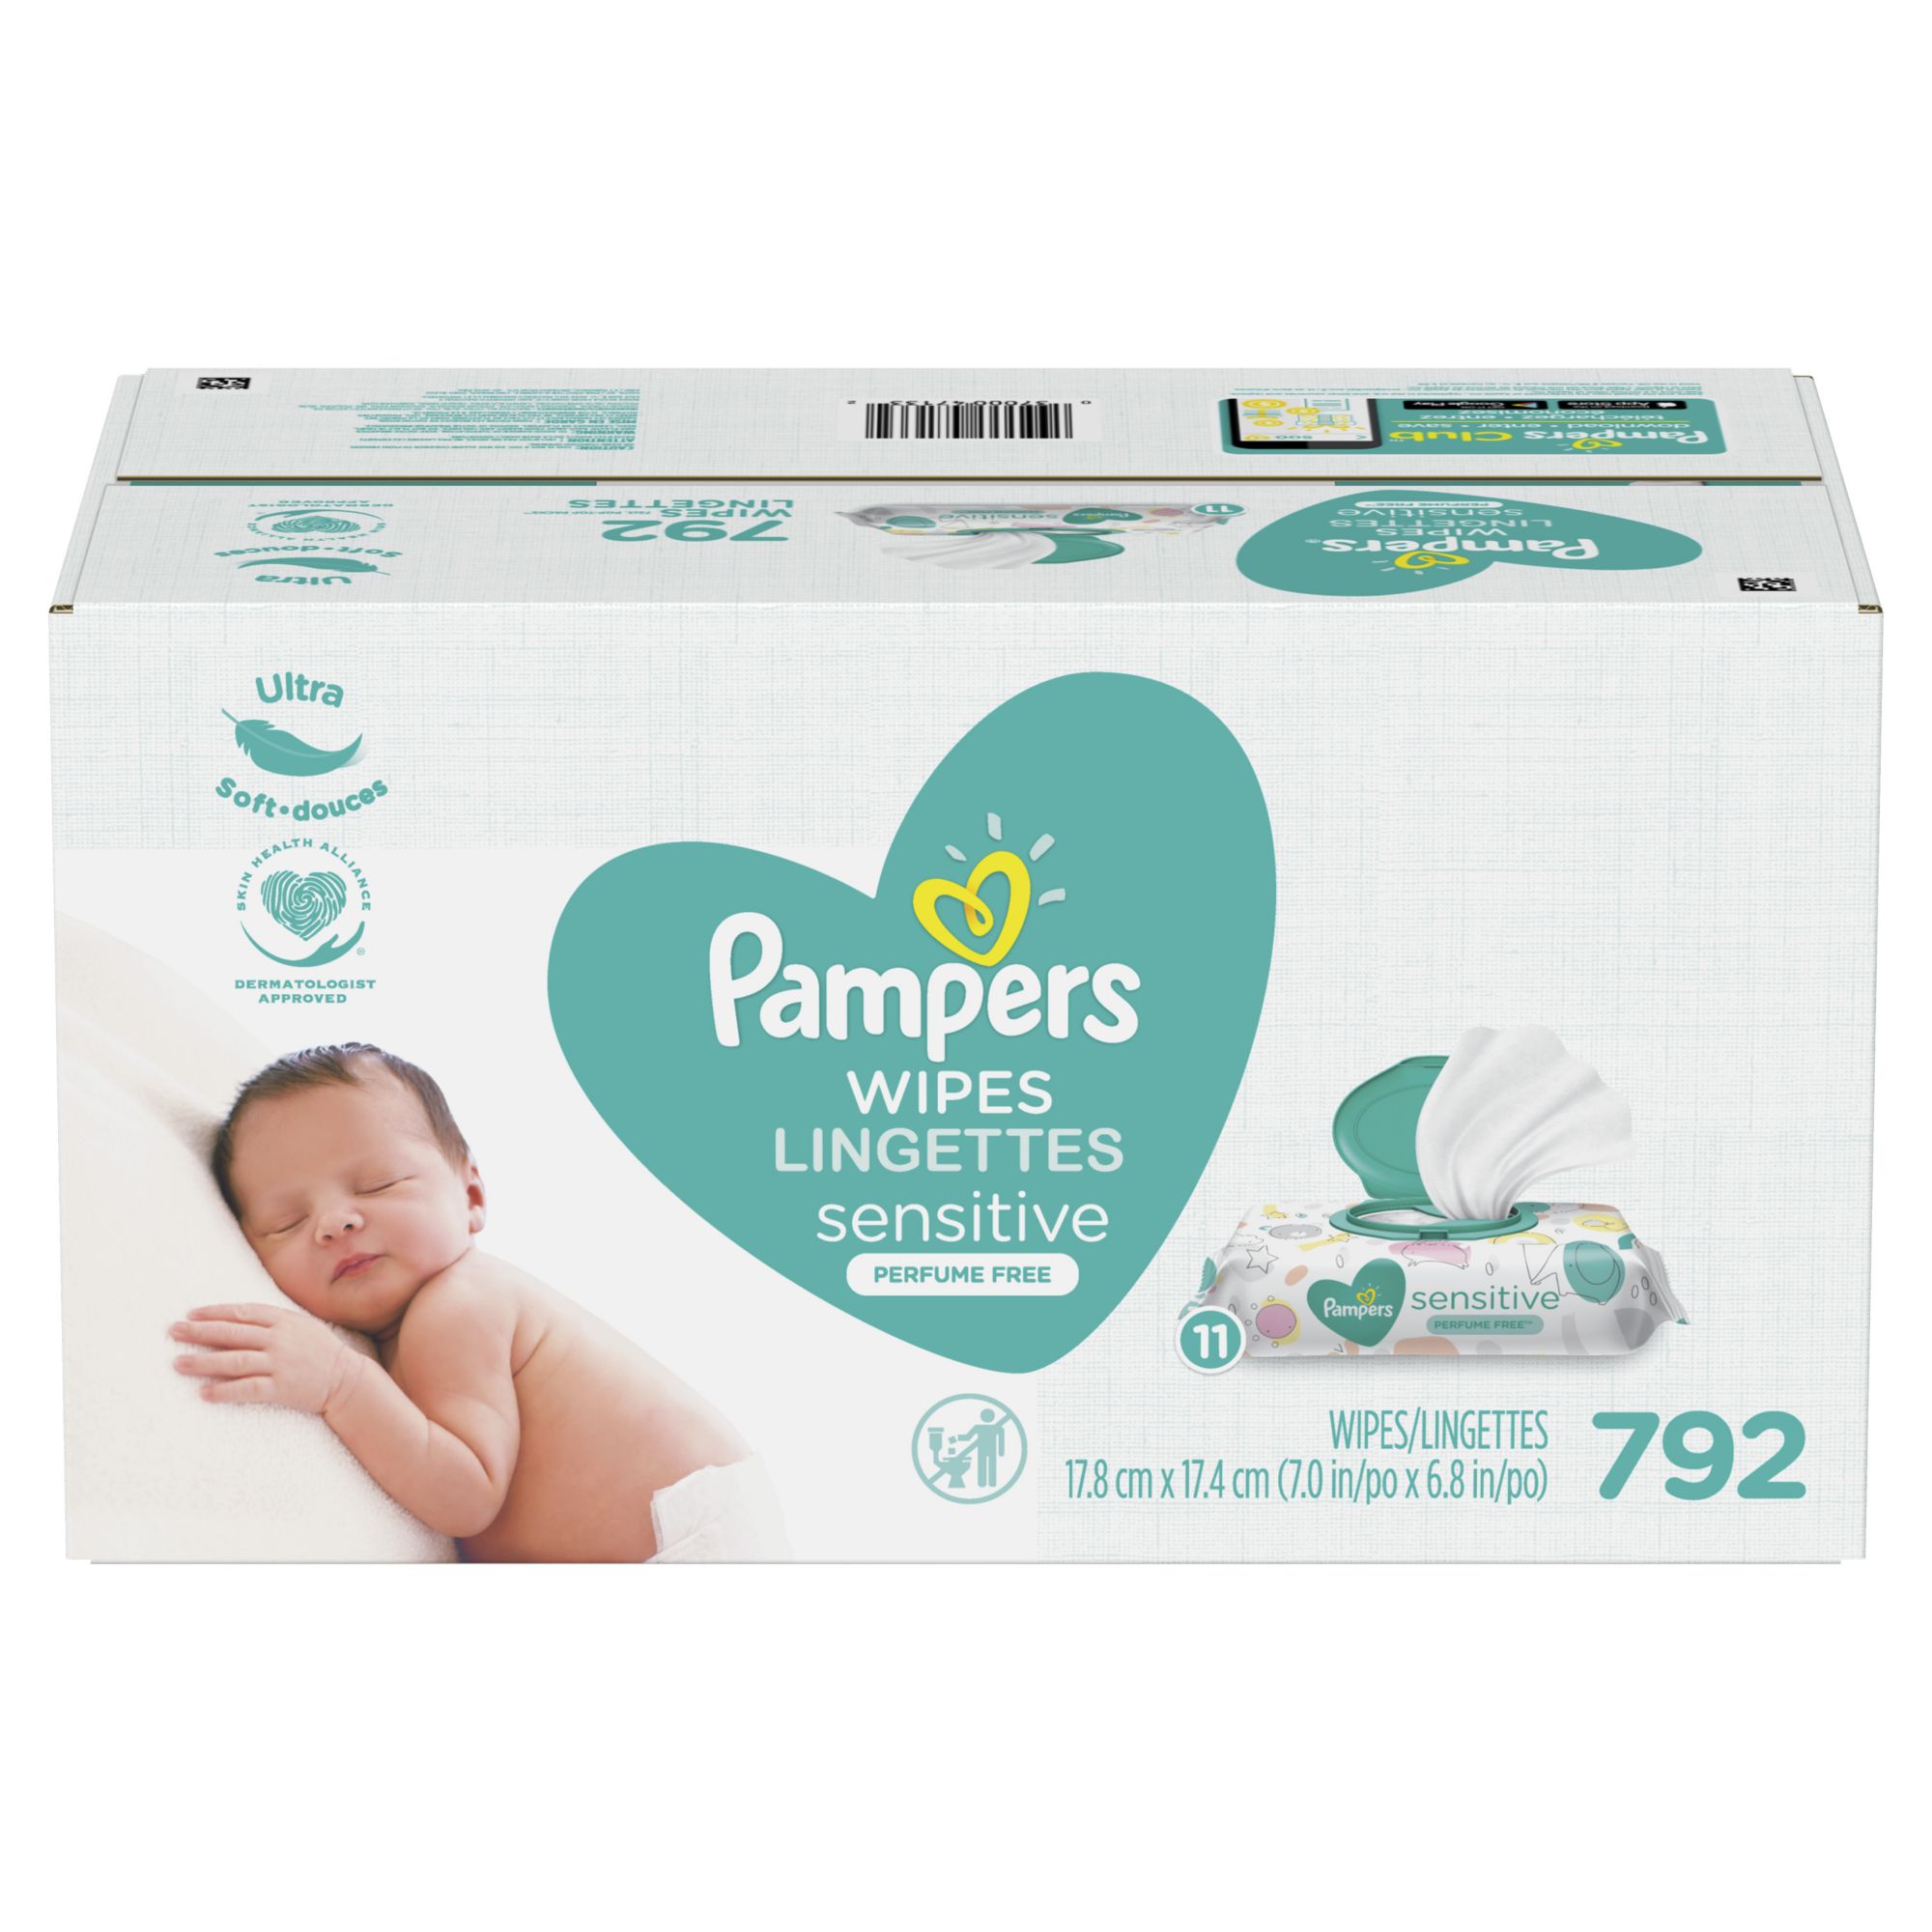 Pampers Baby Wipes Sensitive, 792 Ct 